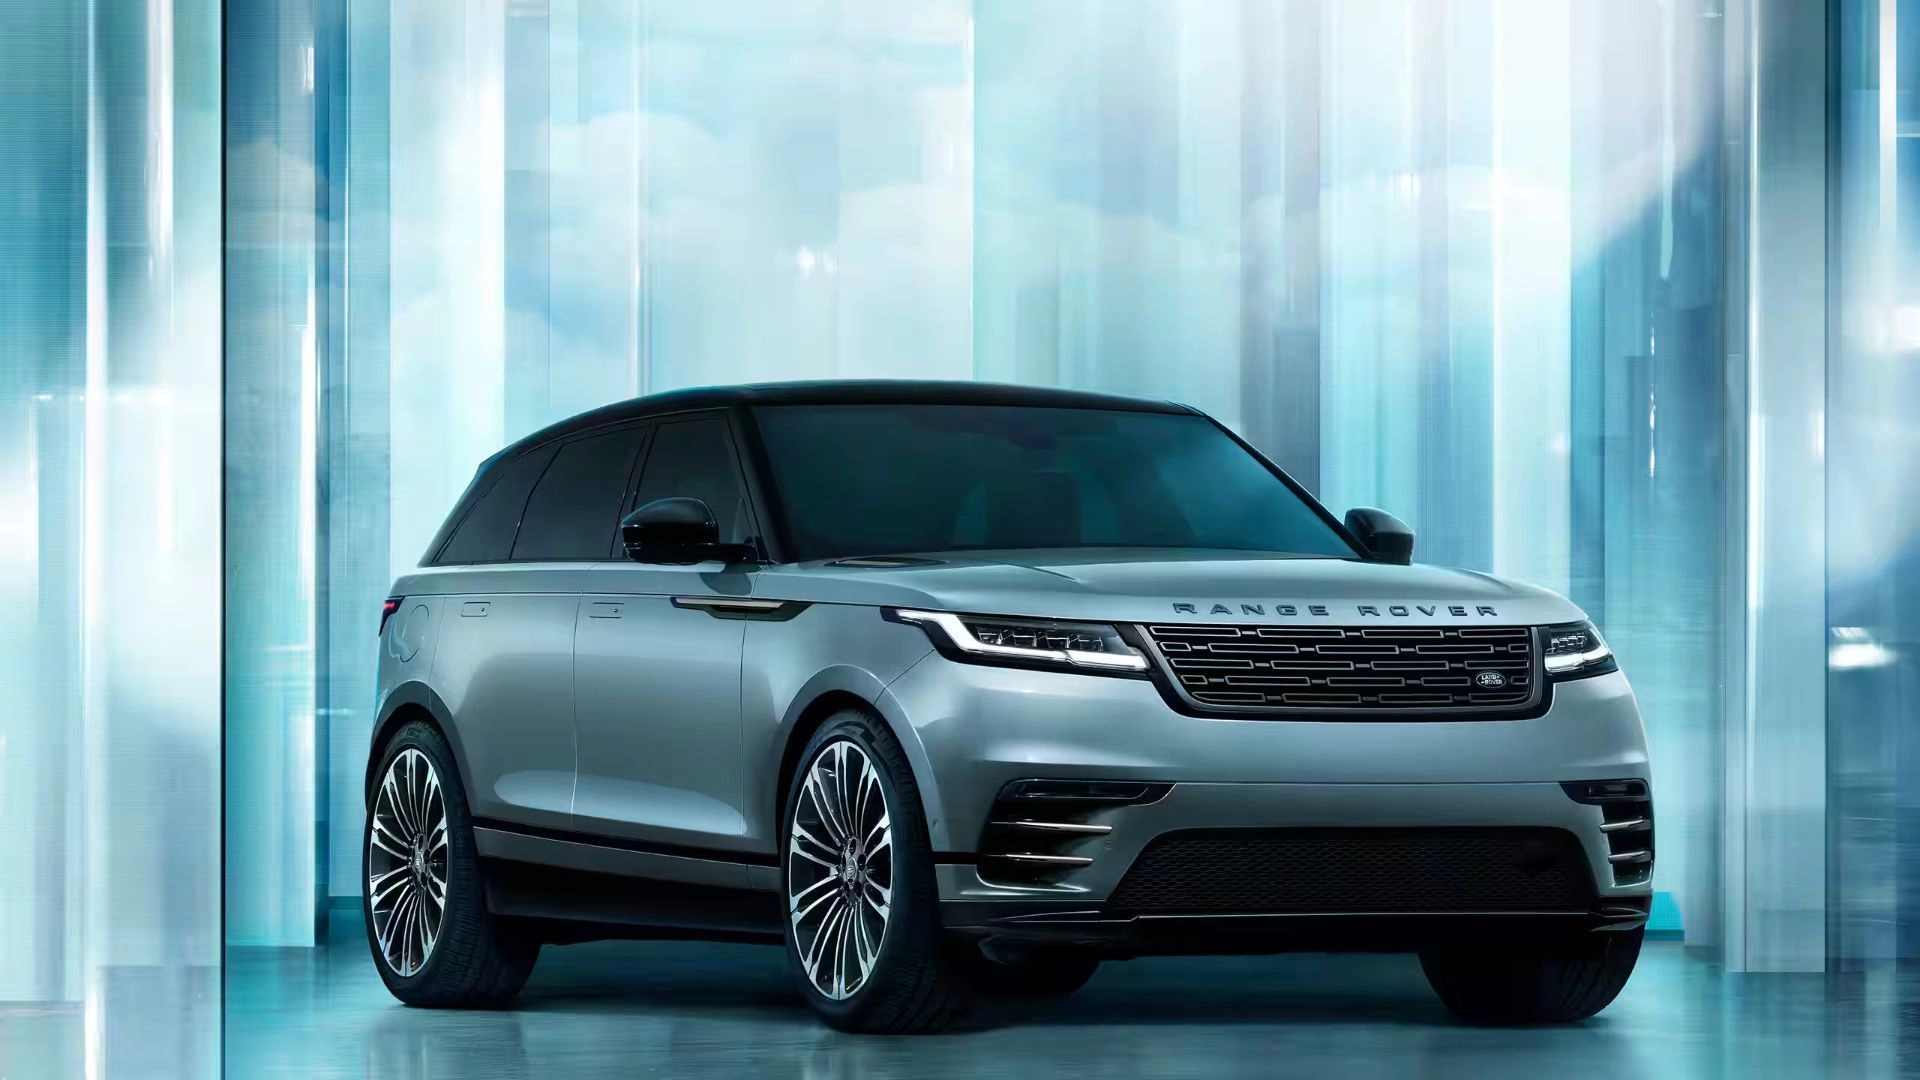 New Models and Features in the 2023 Land Rover Lineup